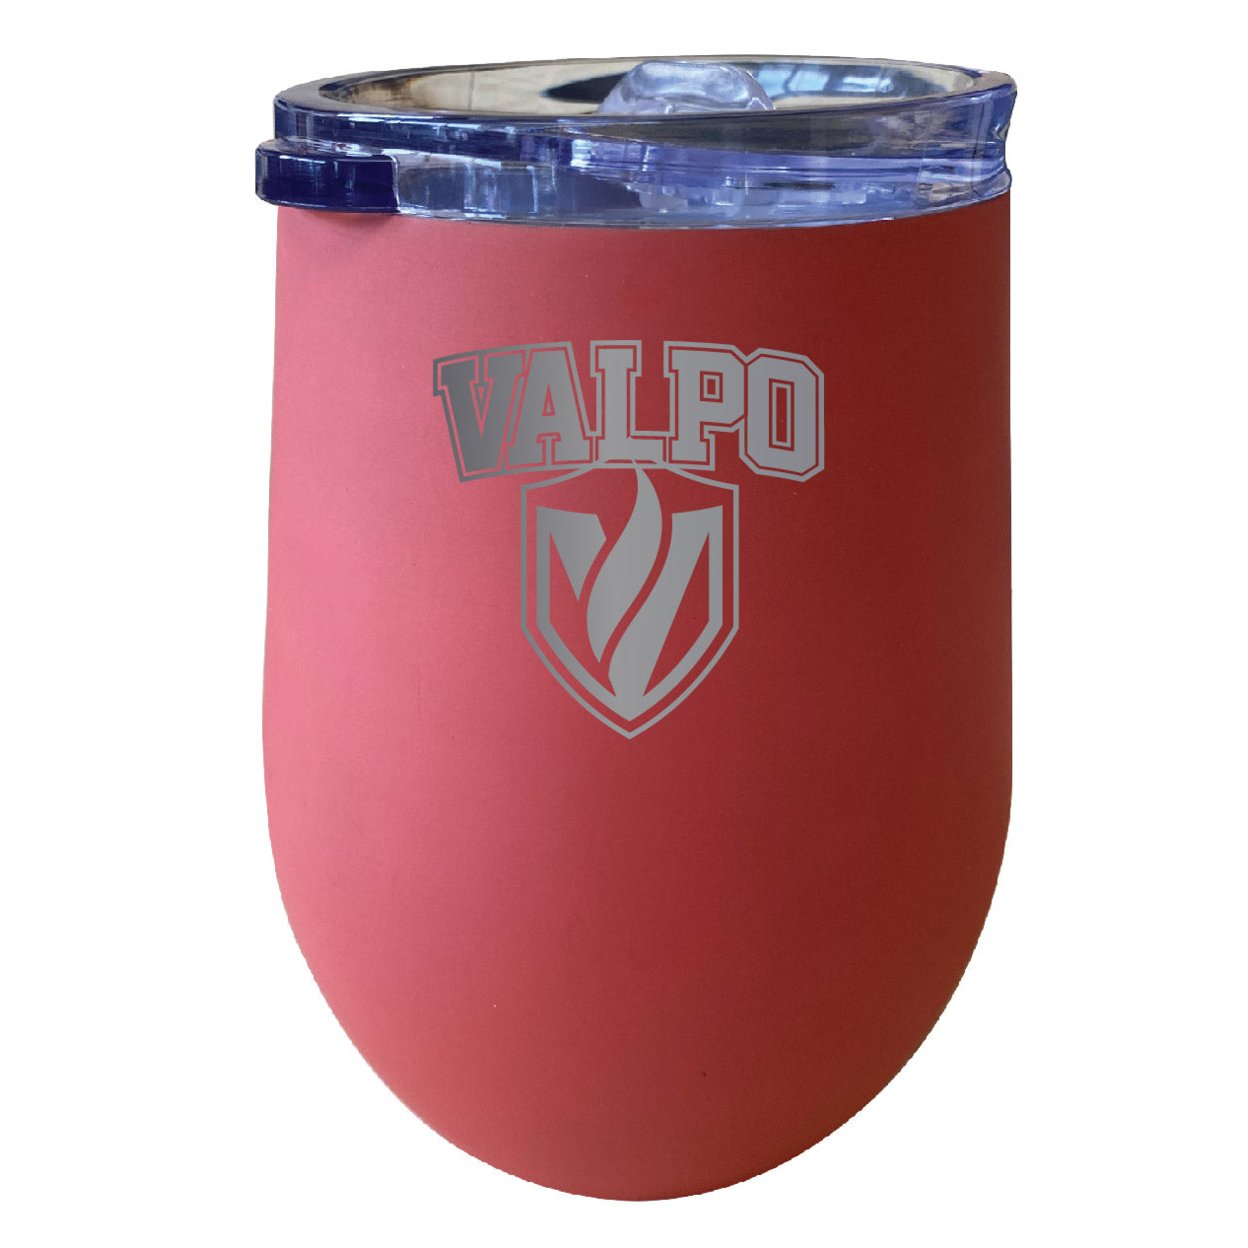 Valparaiso University 12 Oz Etched Insulated Wine Stainless Steel Tumbler - Choose Your Color - Coral